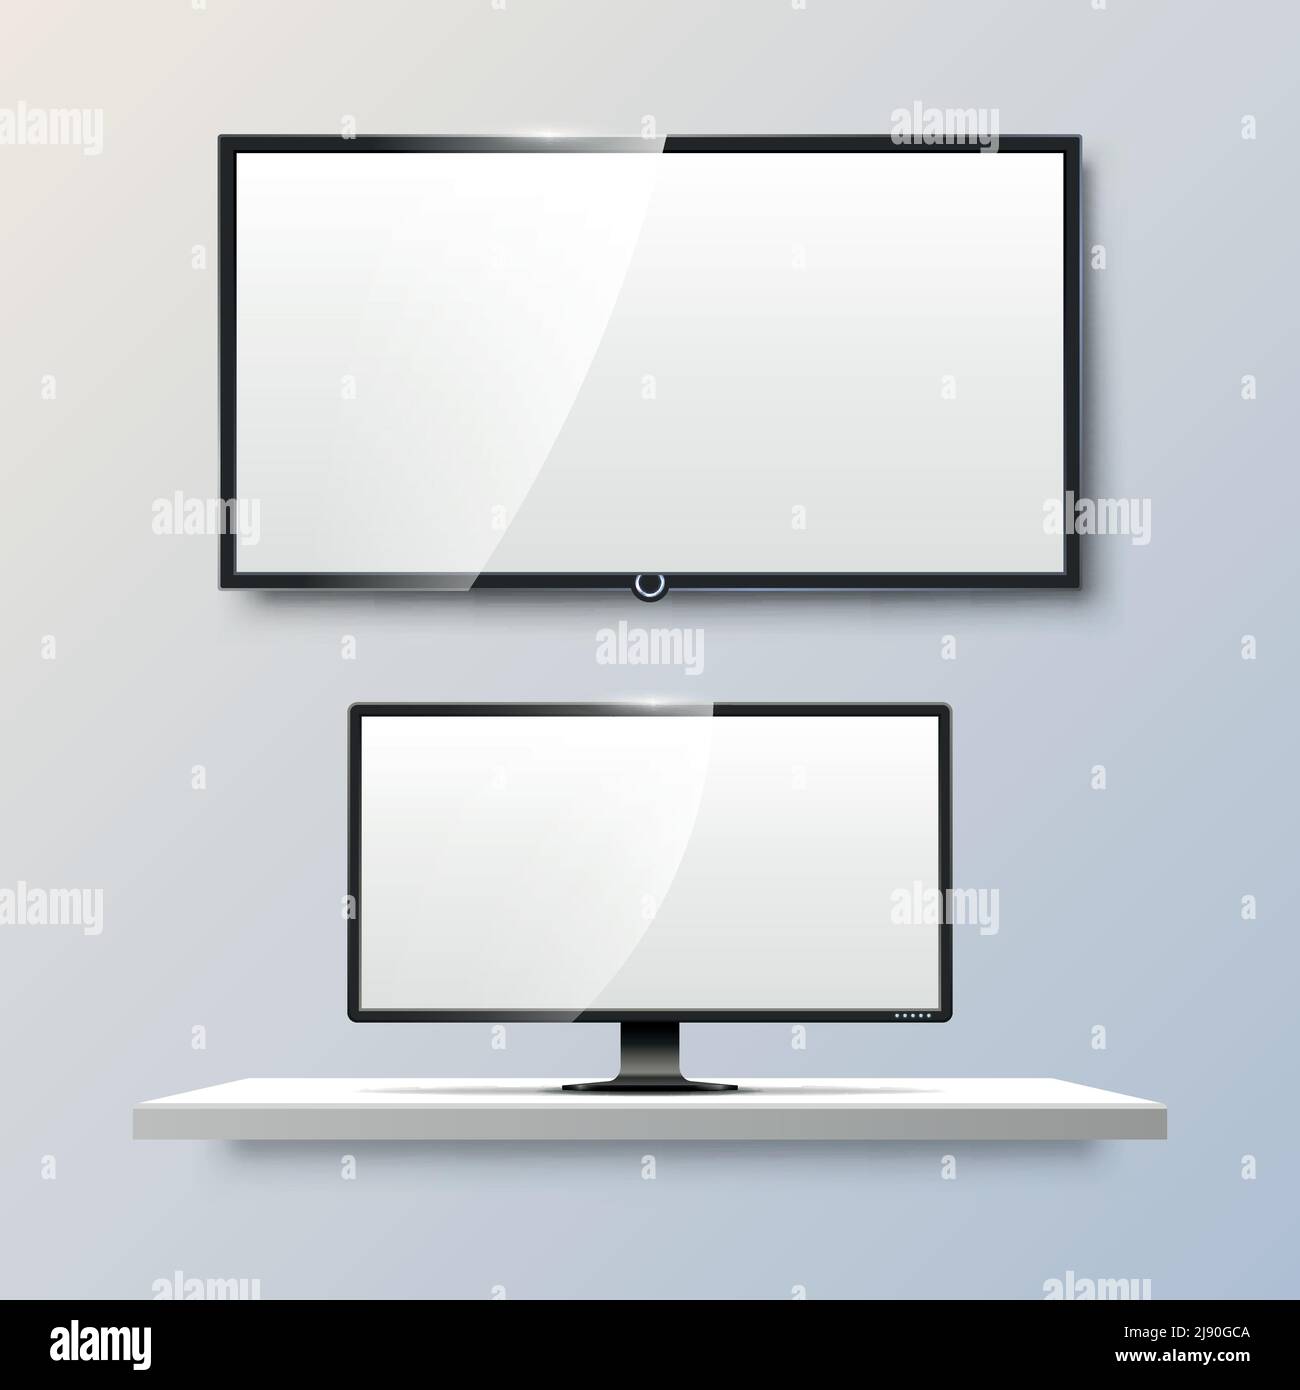 Lcd monitor and empty white flat TV screen. Display blank, technology digital, electronic equipment. Vector illustration templates Stock Vector